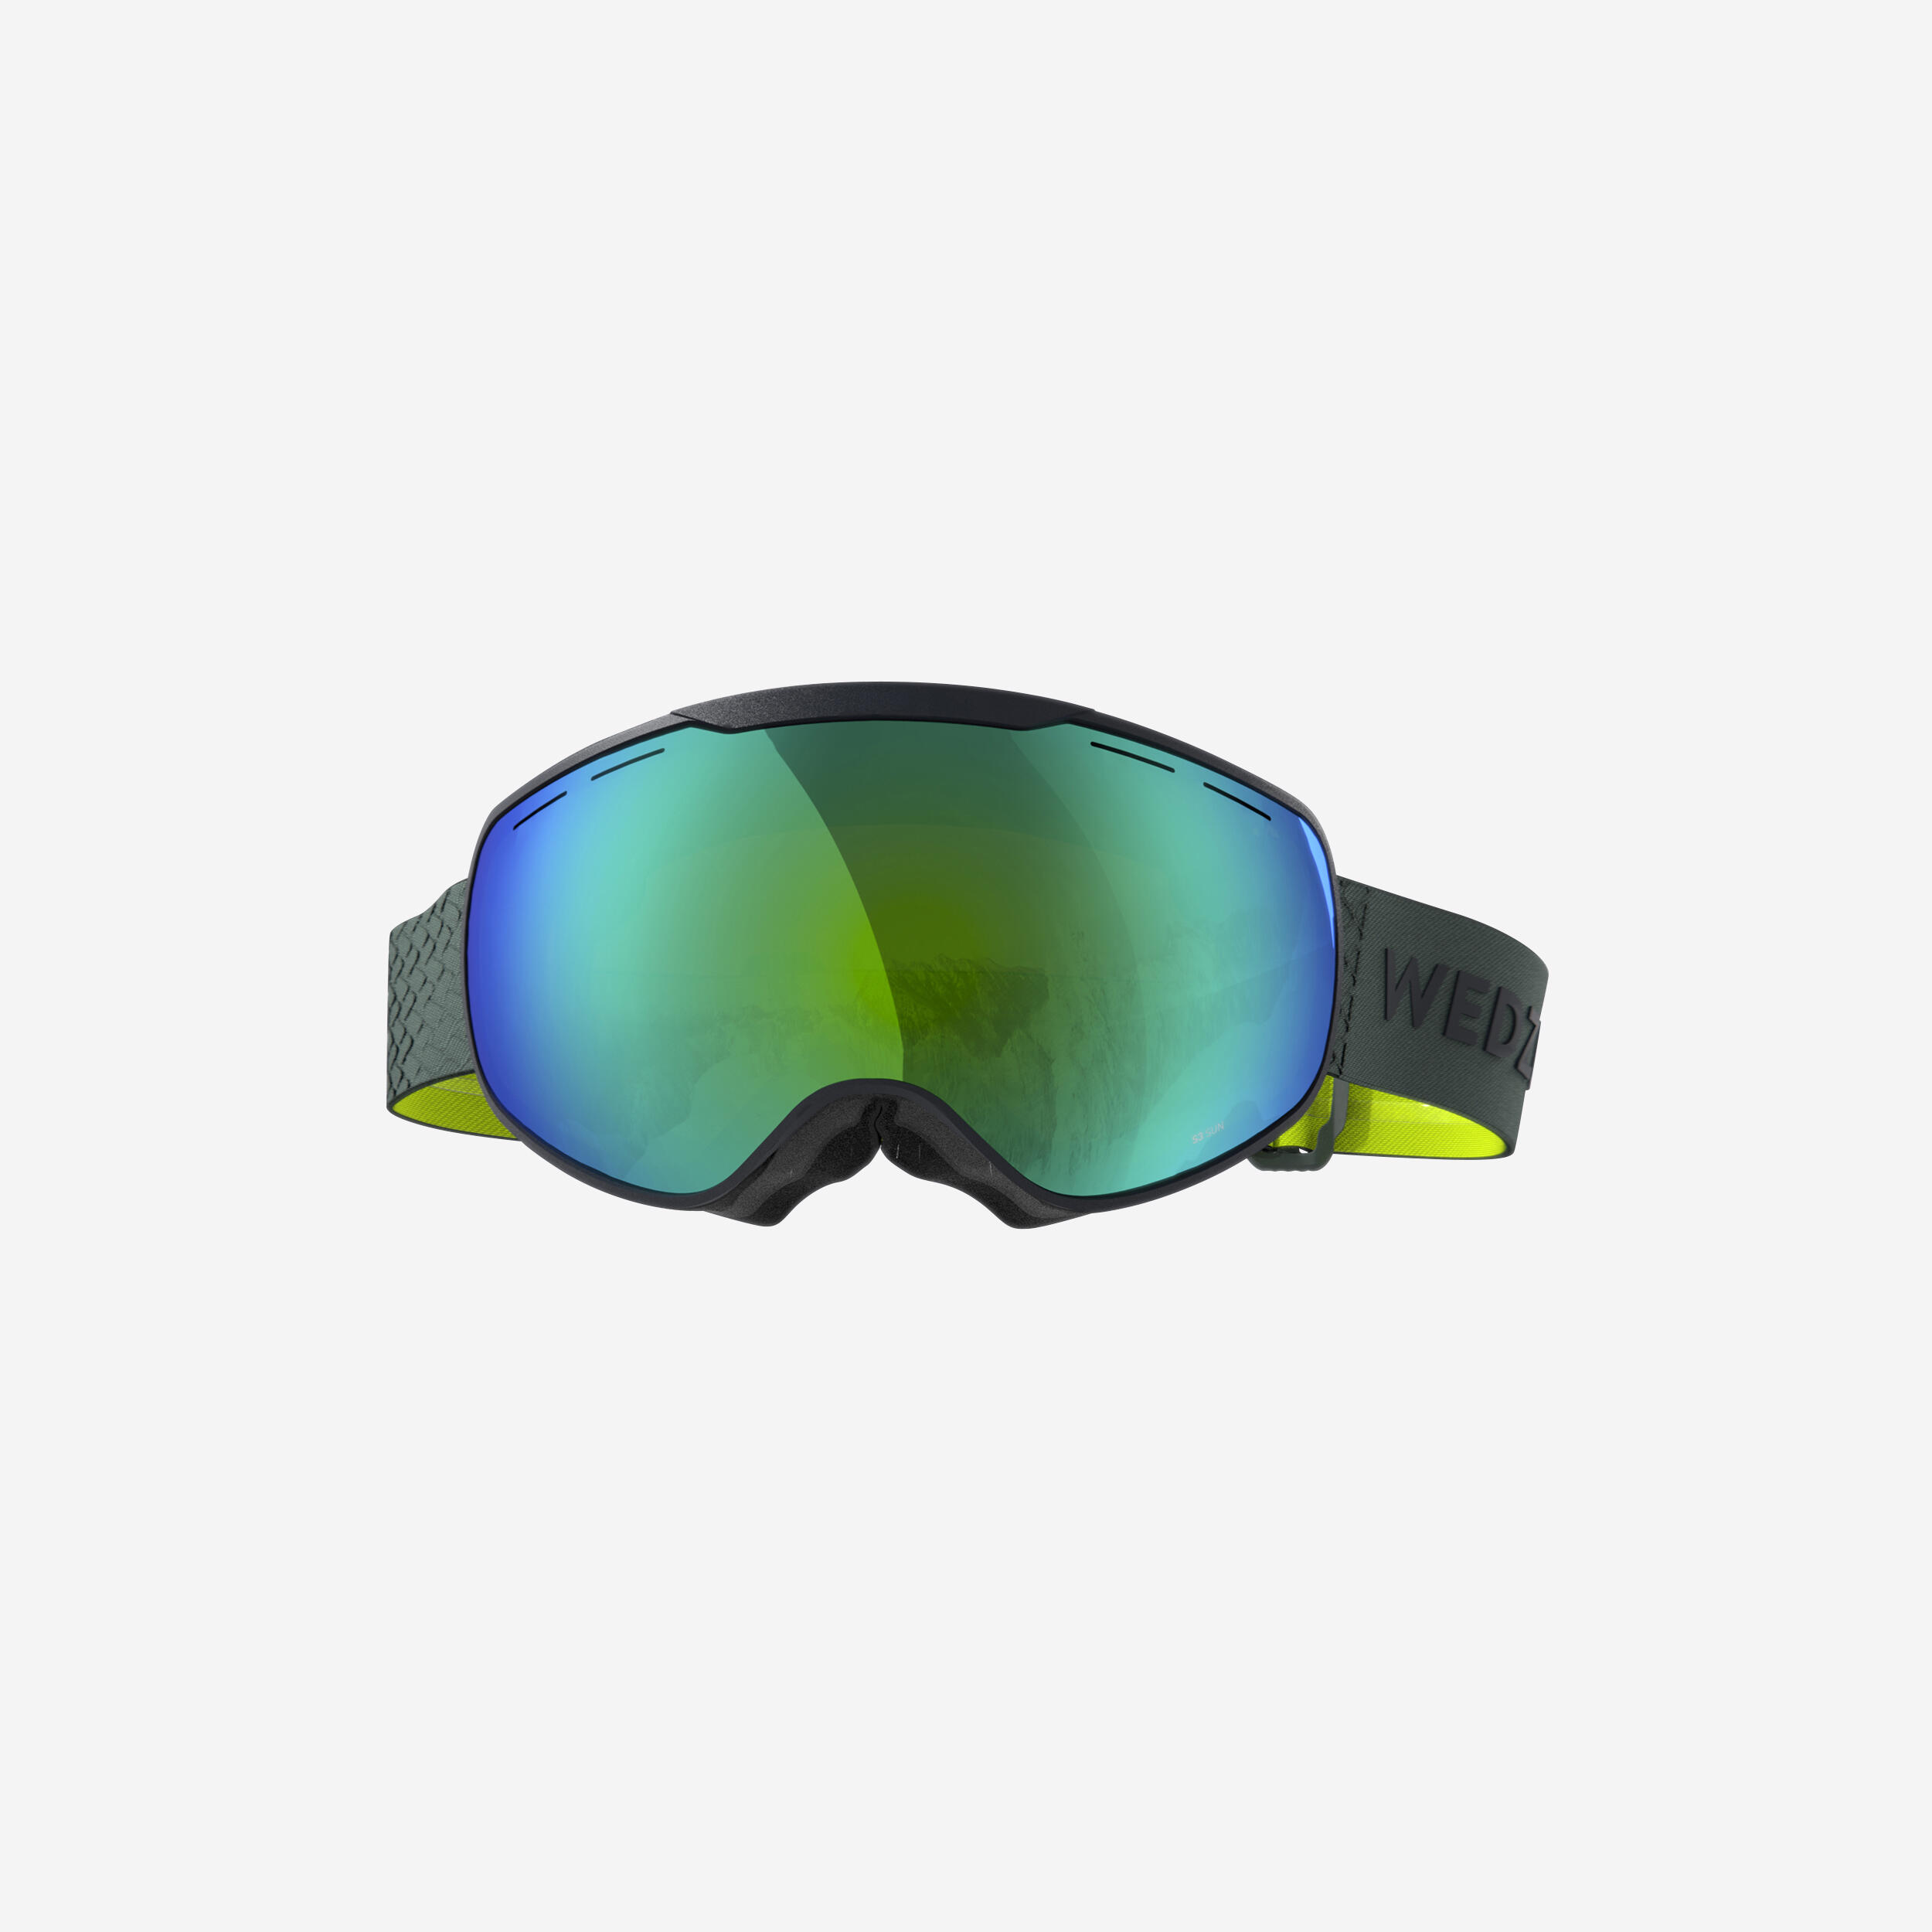 WEDZE KIDS’ AND ADULT SKIING AND SNOWBOARDING GOGGLES GOOD WEATHER - G 900 S3 - GREEN